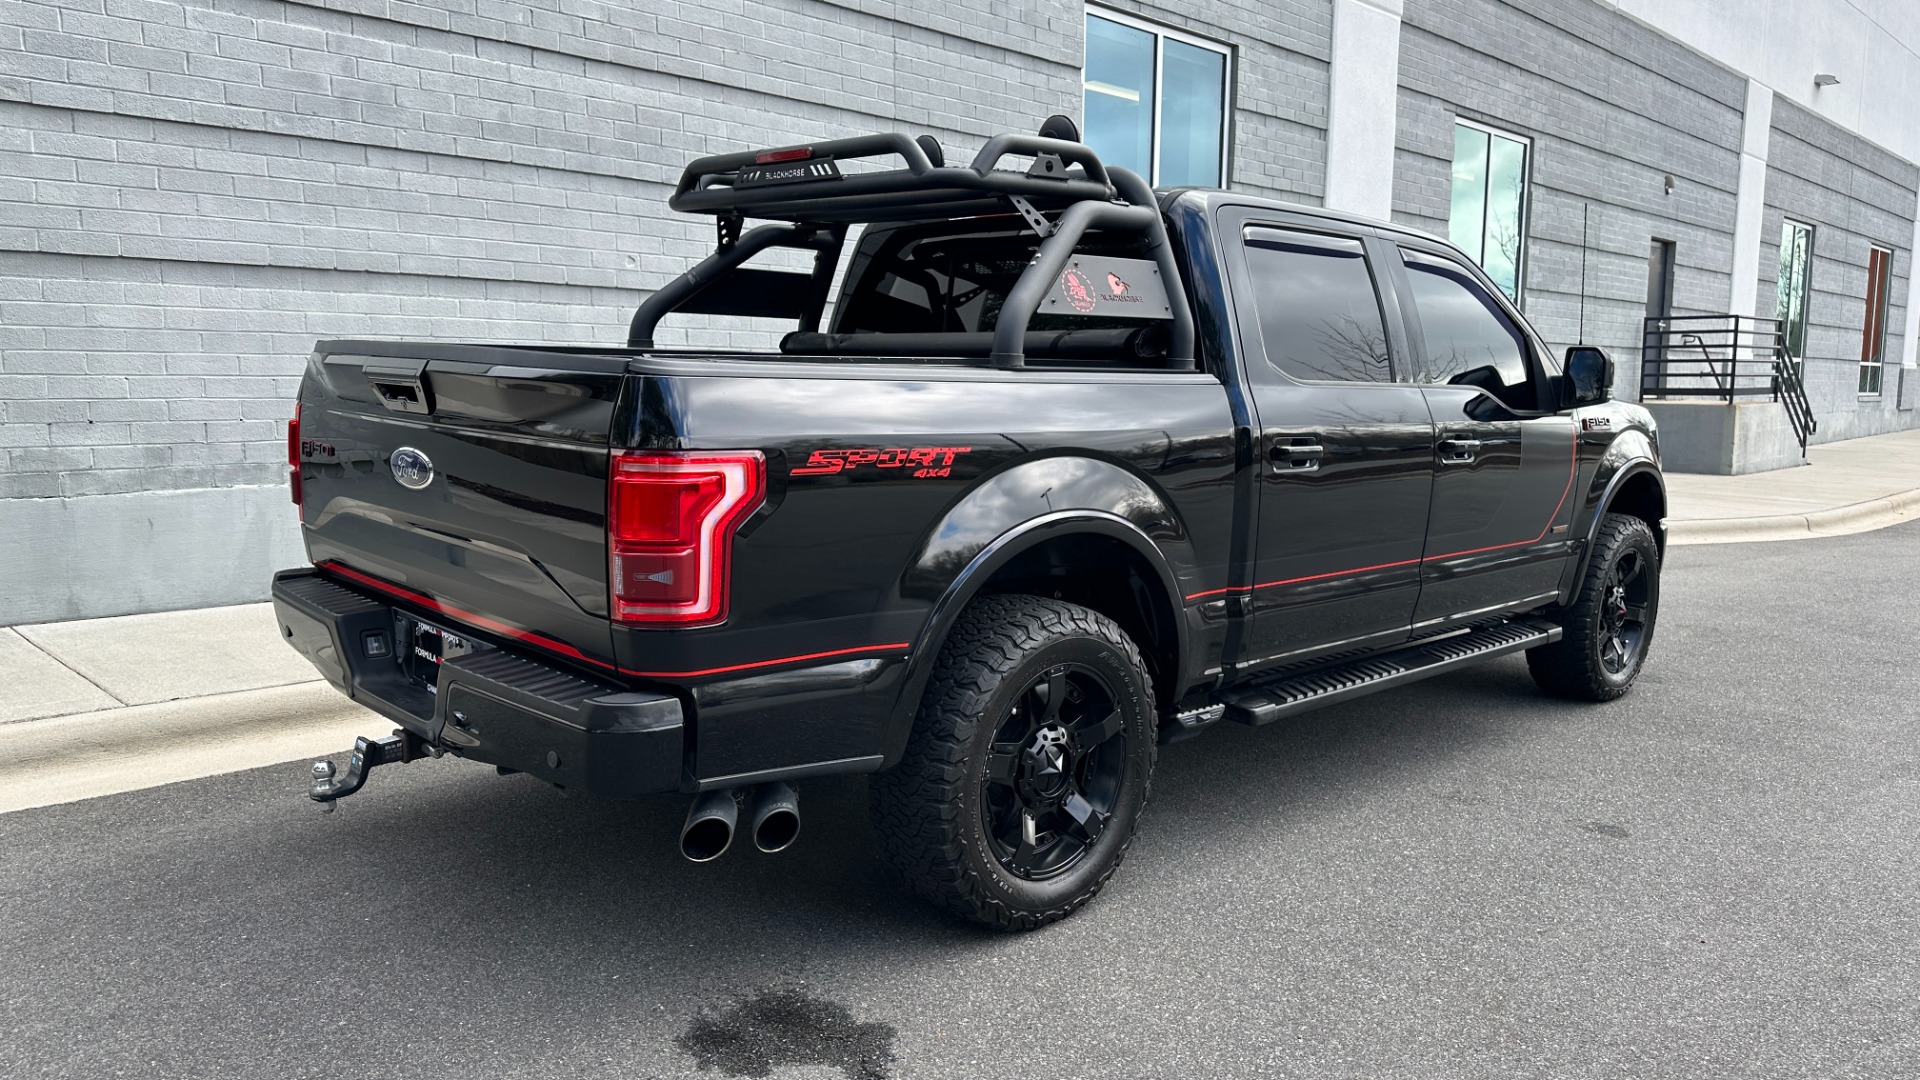 Used 2017 Ford F-150 LARIAT / SPORT EDITION / 4X4 / CREW CAB / UPGRADED WHEELS / BUMPERS / LIGHT for sale Sold at Formula Imports in Charlotte NC 28227 7